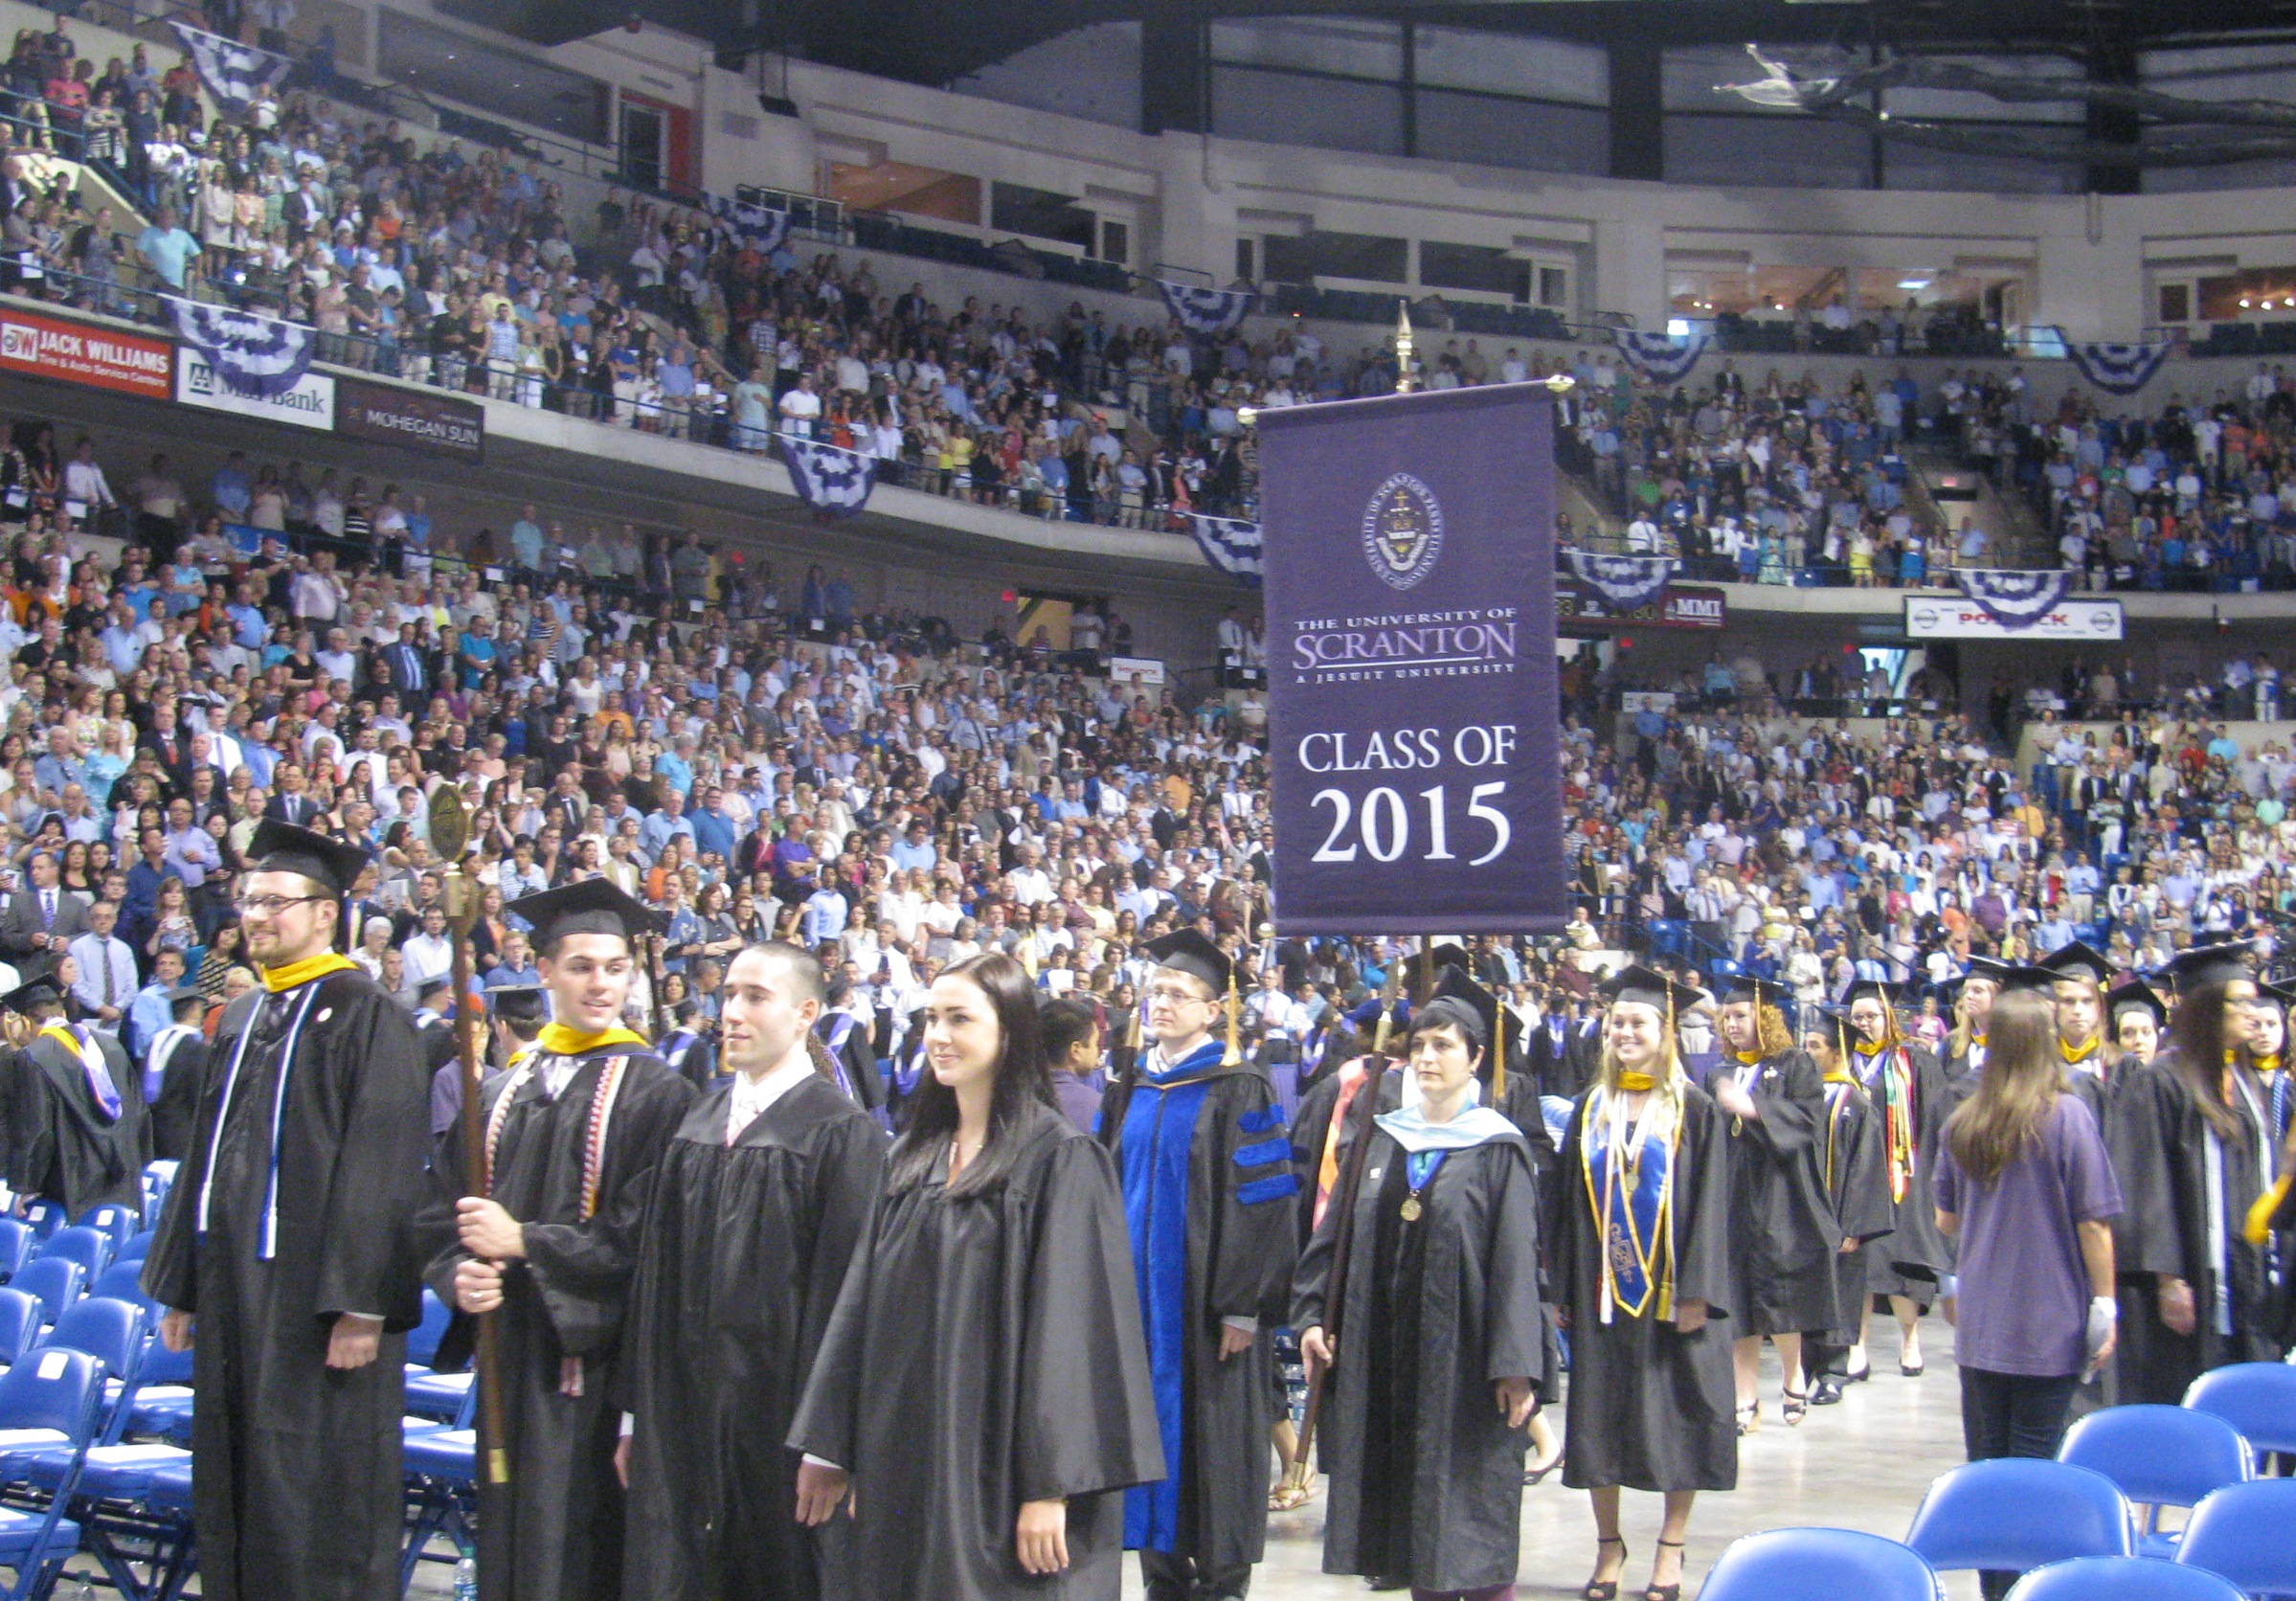 The University of Scranton conferred more than 930 bachelor’s and associate degrees at its undergraduate commencement on May 31 at the Mohegan Sun Arena at Casey Plaza in Wilkes-Barre.